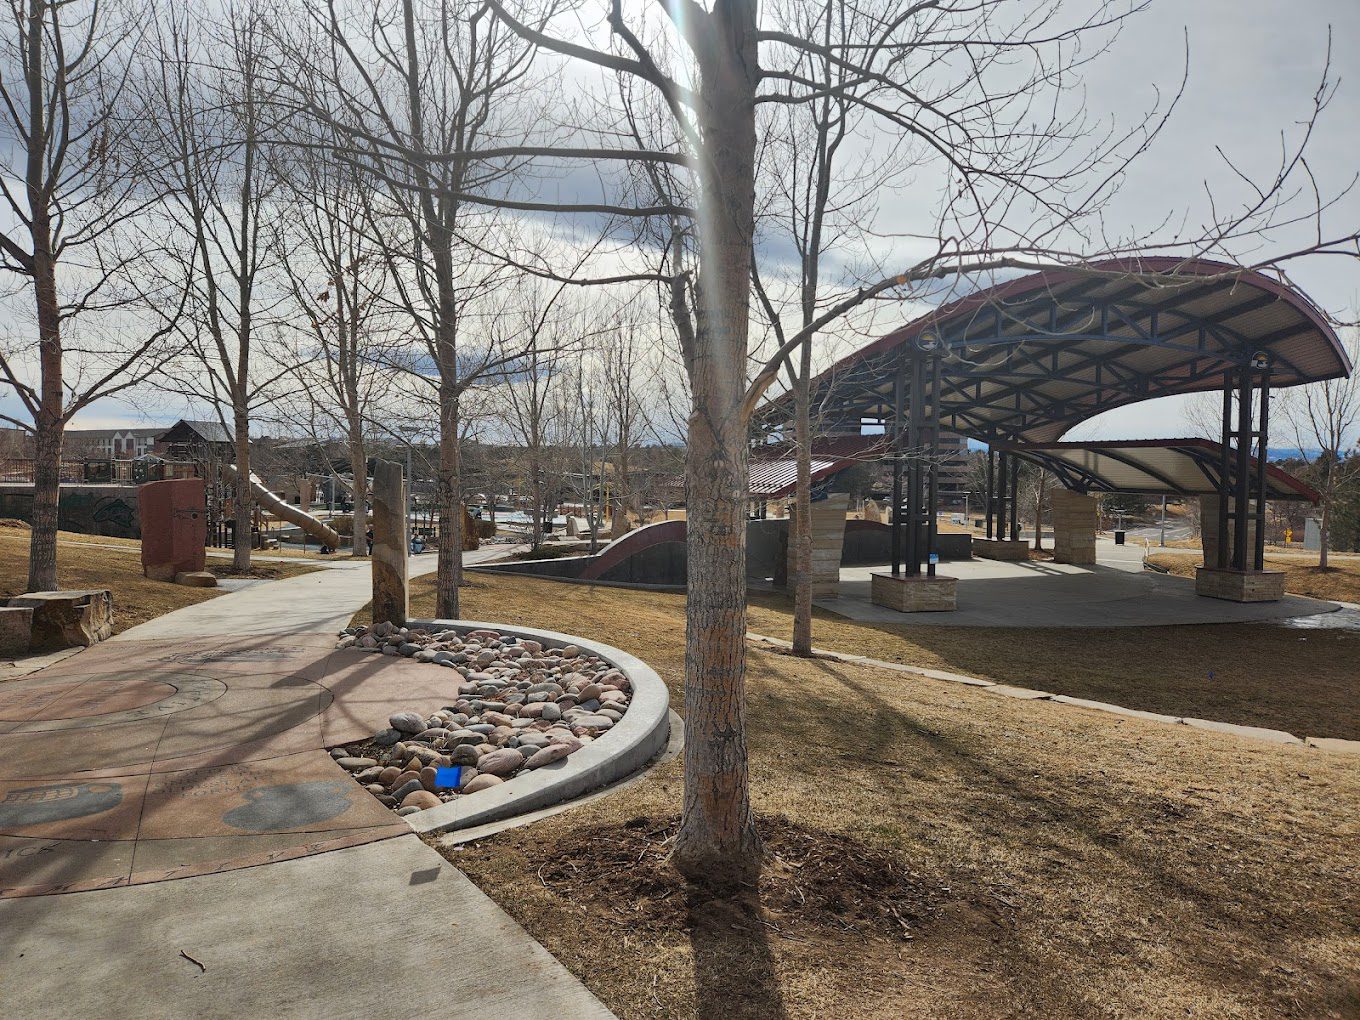 Image of center park in centennial, co with an amphitheater and playground